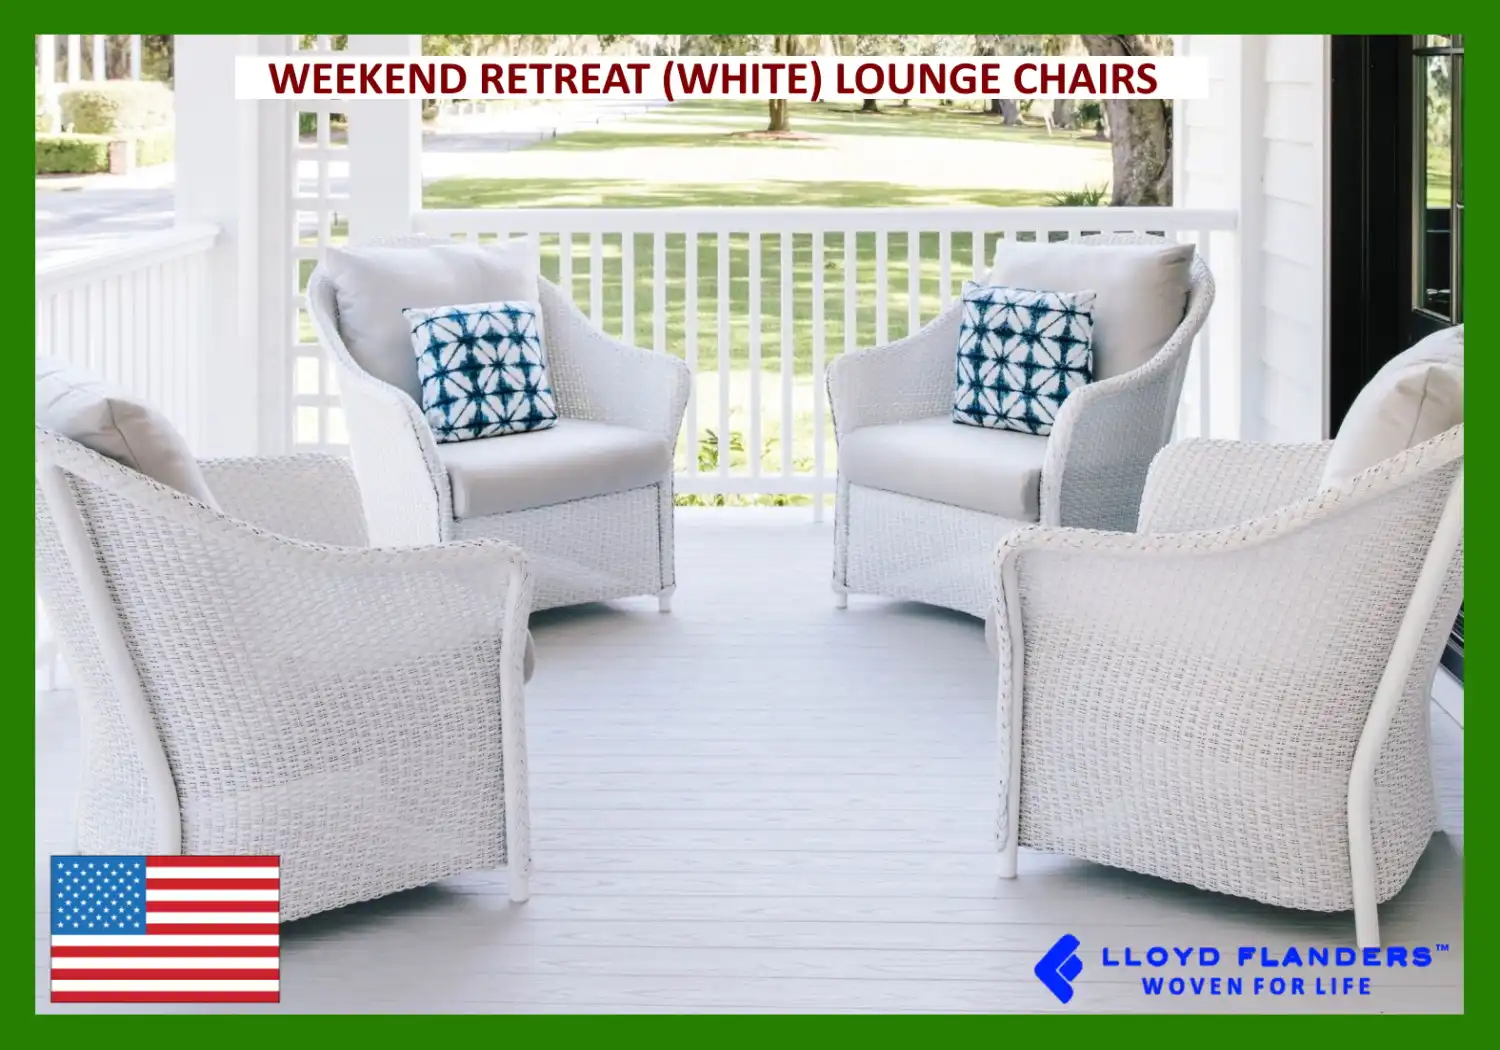 WEEKEND RETREAT (WHITE) LOUNGE CHAIRS